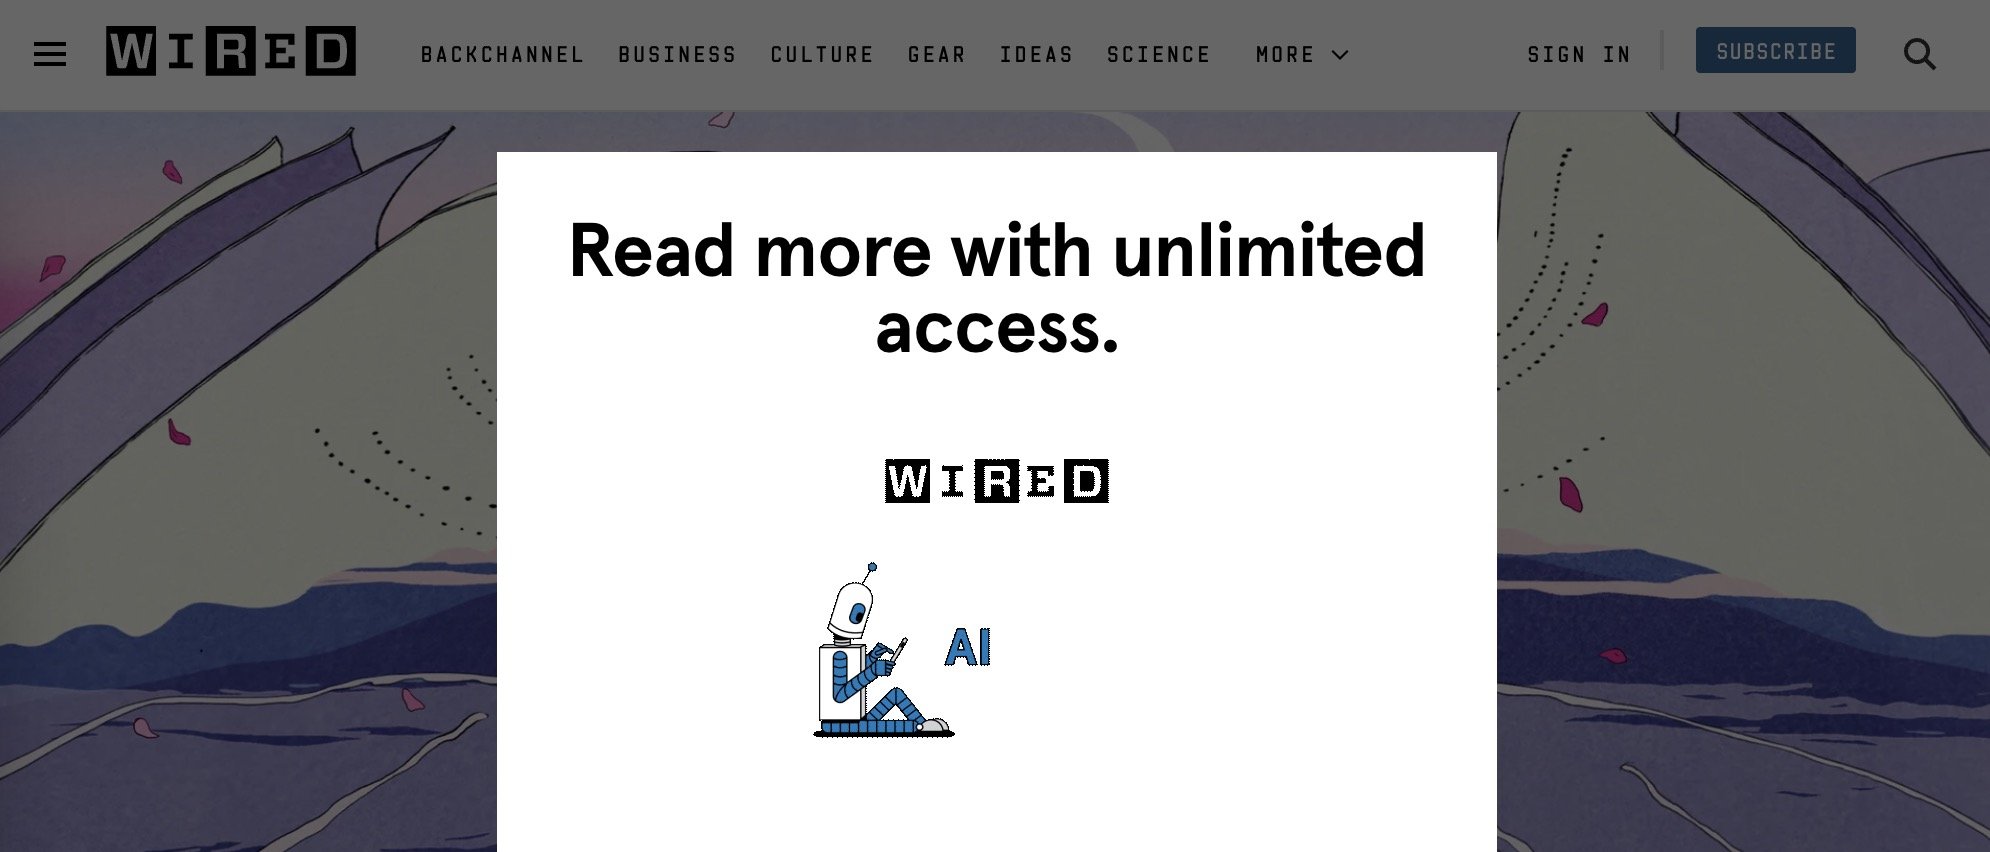 Wired Magazine's website paywall is an example of a revenue stream type you can use for your online business.